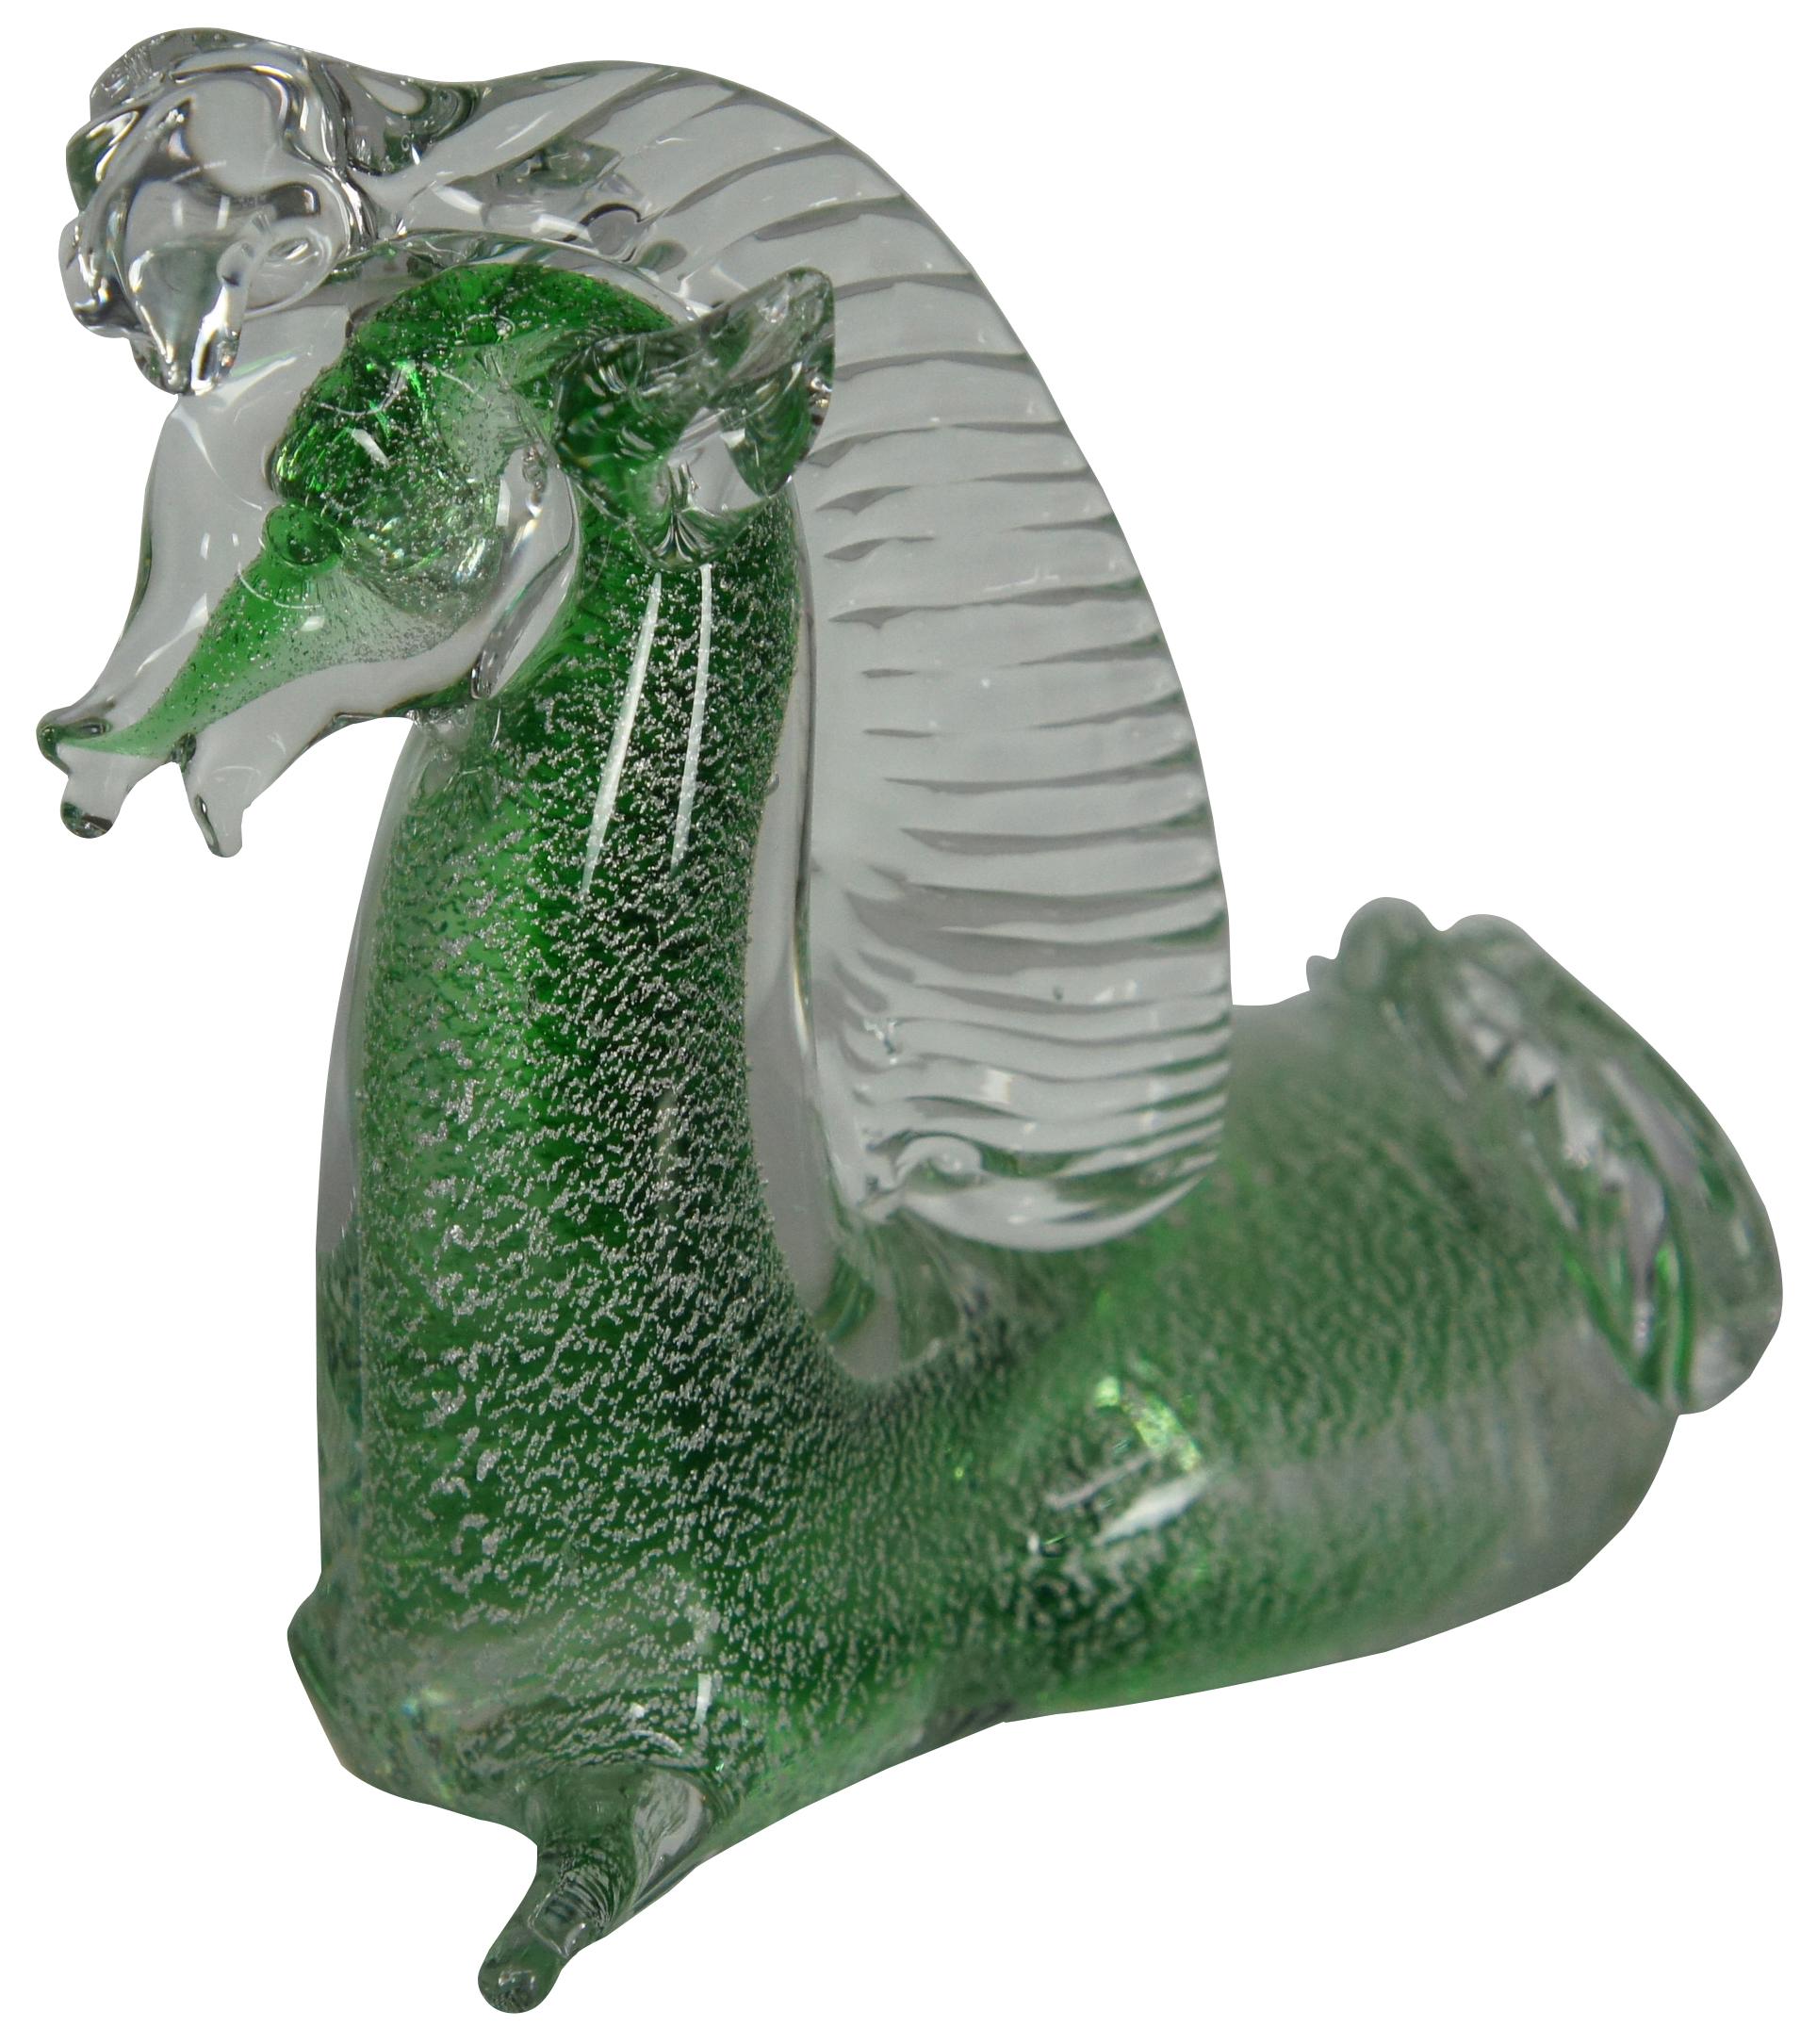 Hand blown Murano art glass figurine or paperweight in the shape of a green and white speckled kneeling or laying horse with transparent mane. Measure: 7